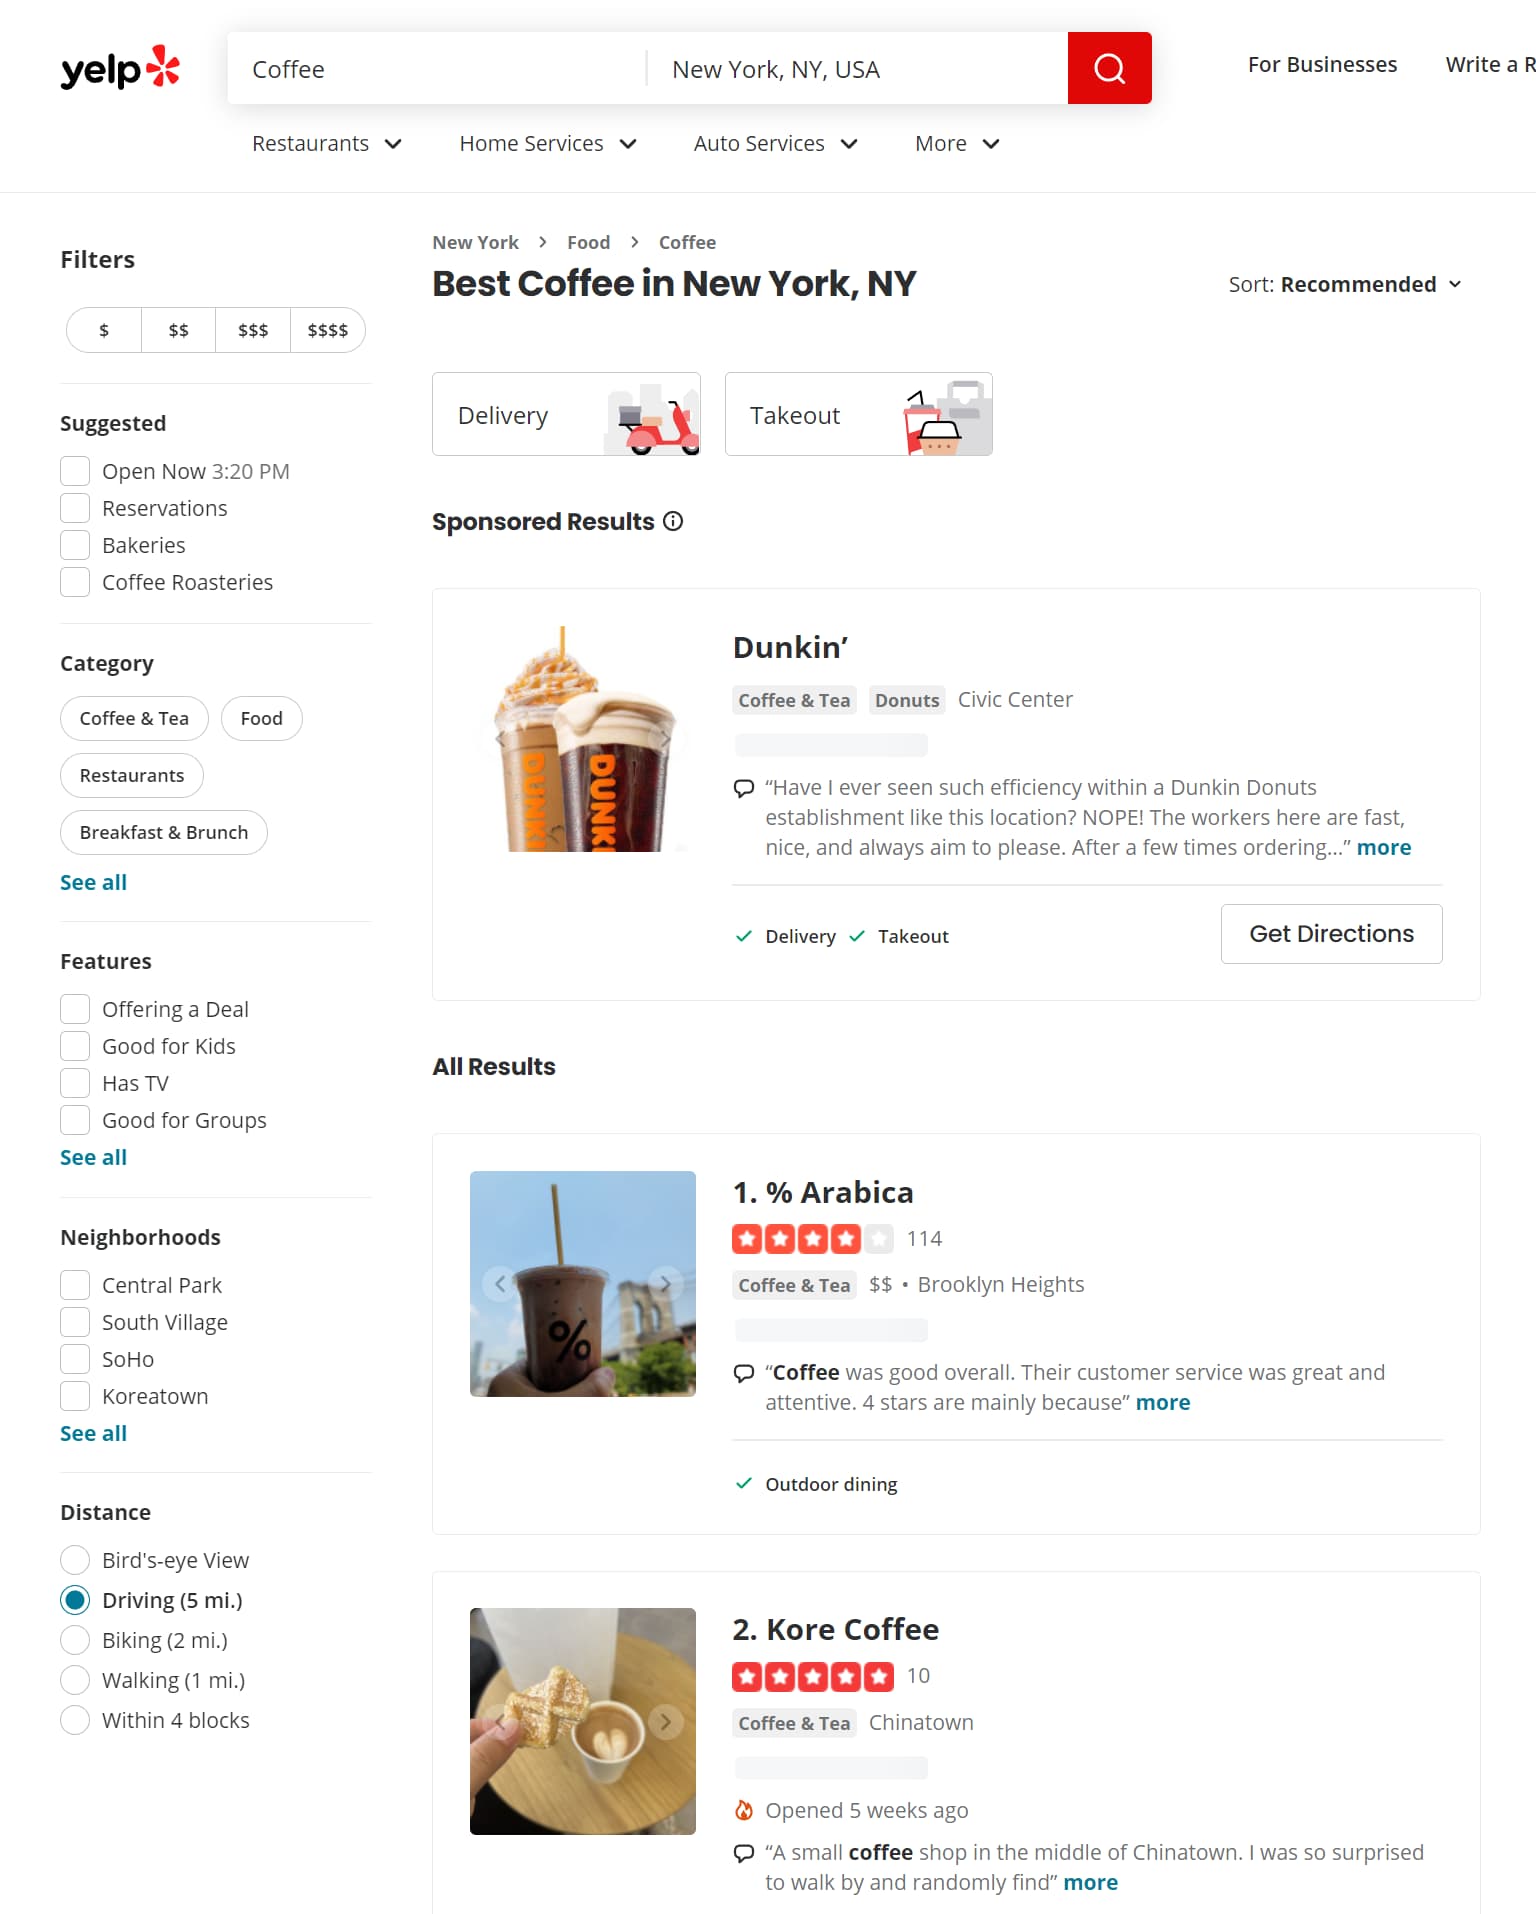 Example with find_desc: Coffee and find_loc: New York, NY, USA as a location